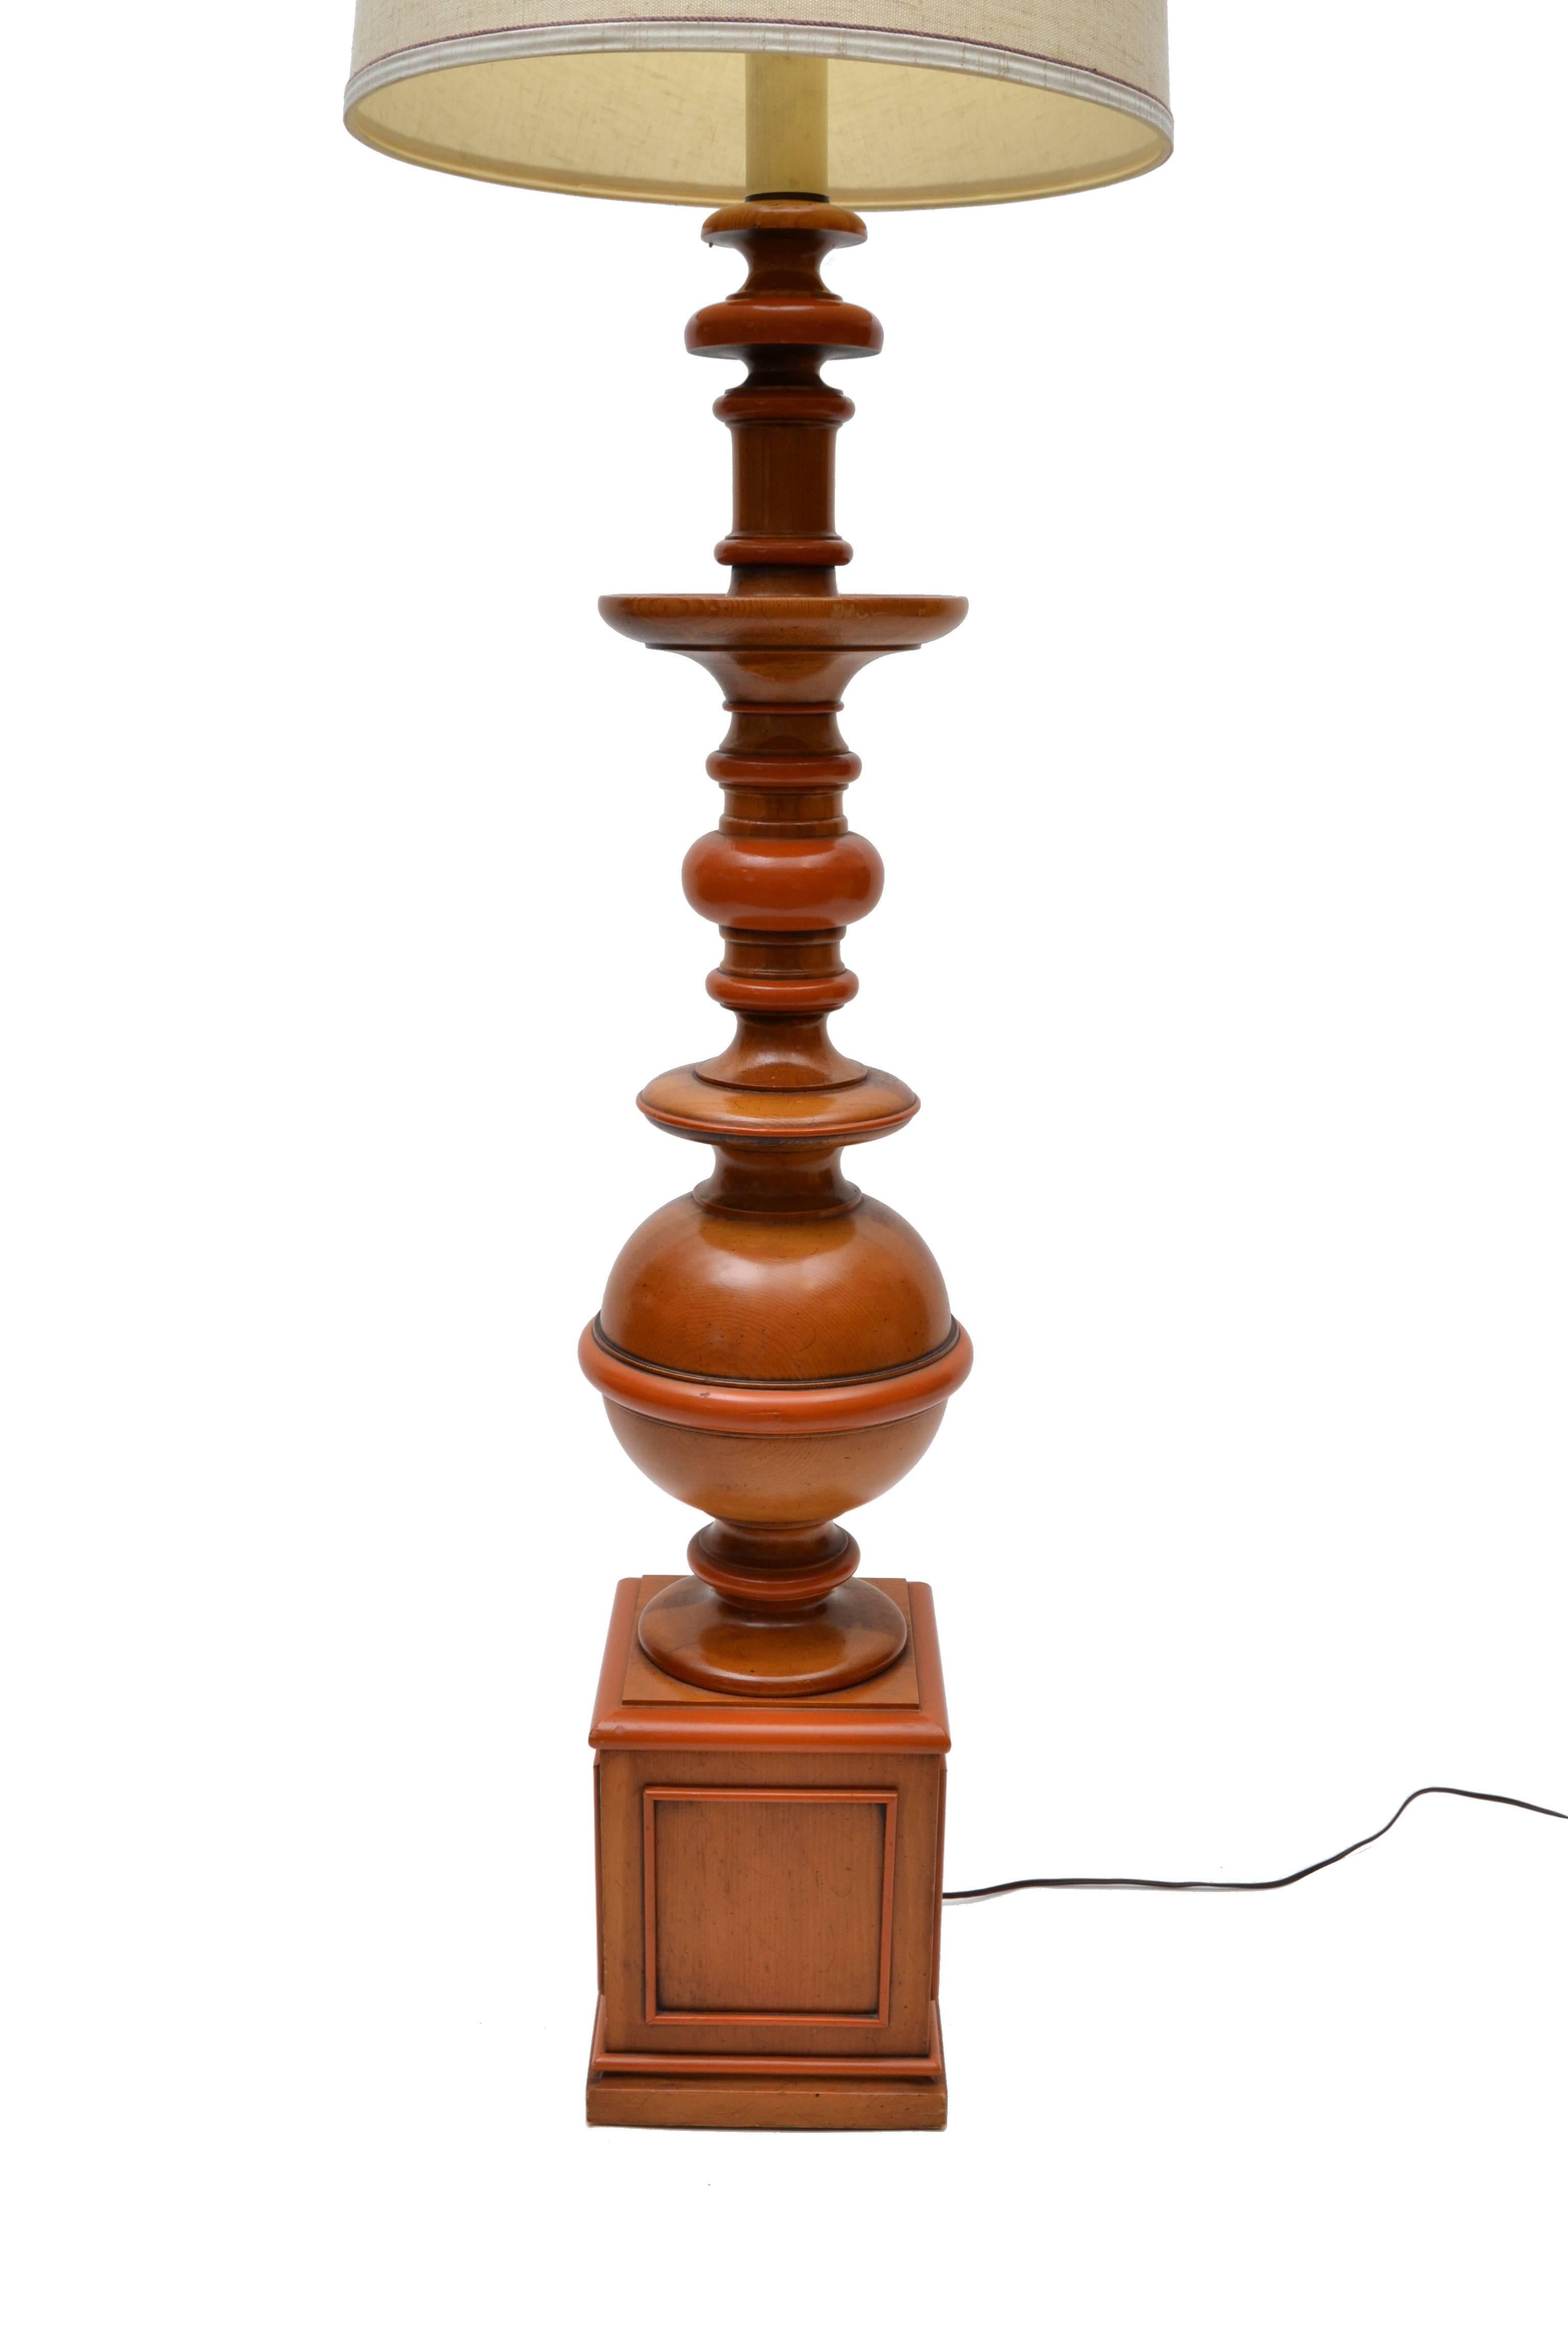 American Regency wooden knob creek of Morganton floor lamp with shade.
Comes with double sockets and string pulls.
Perfect working condition and uses each a max. 60 watts light bulb.
Dimension shade:
Diameter 17 inches
Height 16.25 inches.